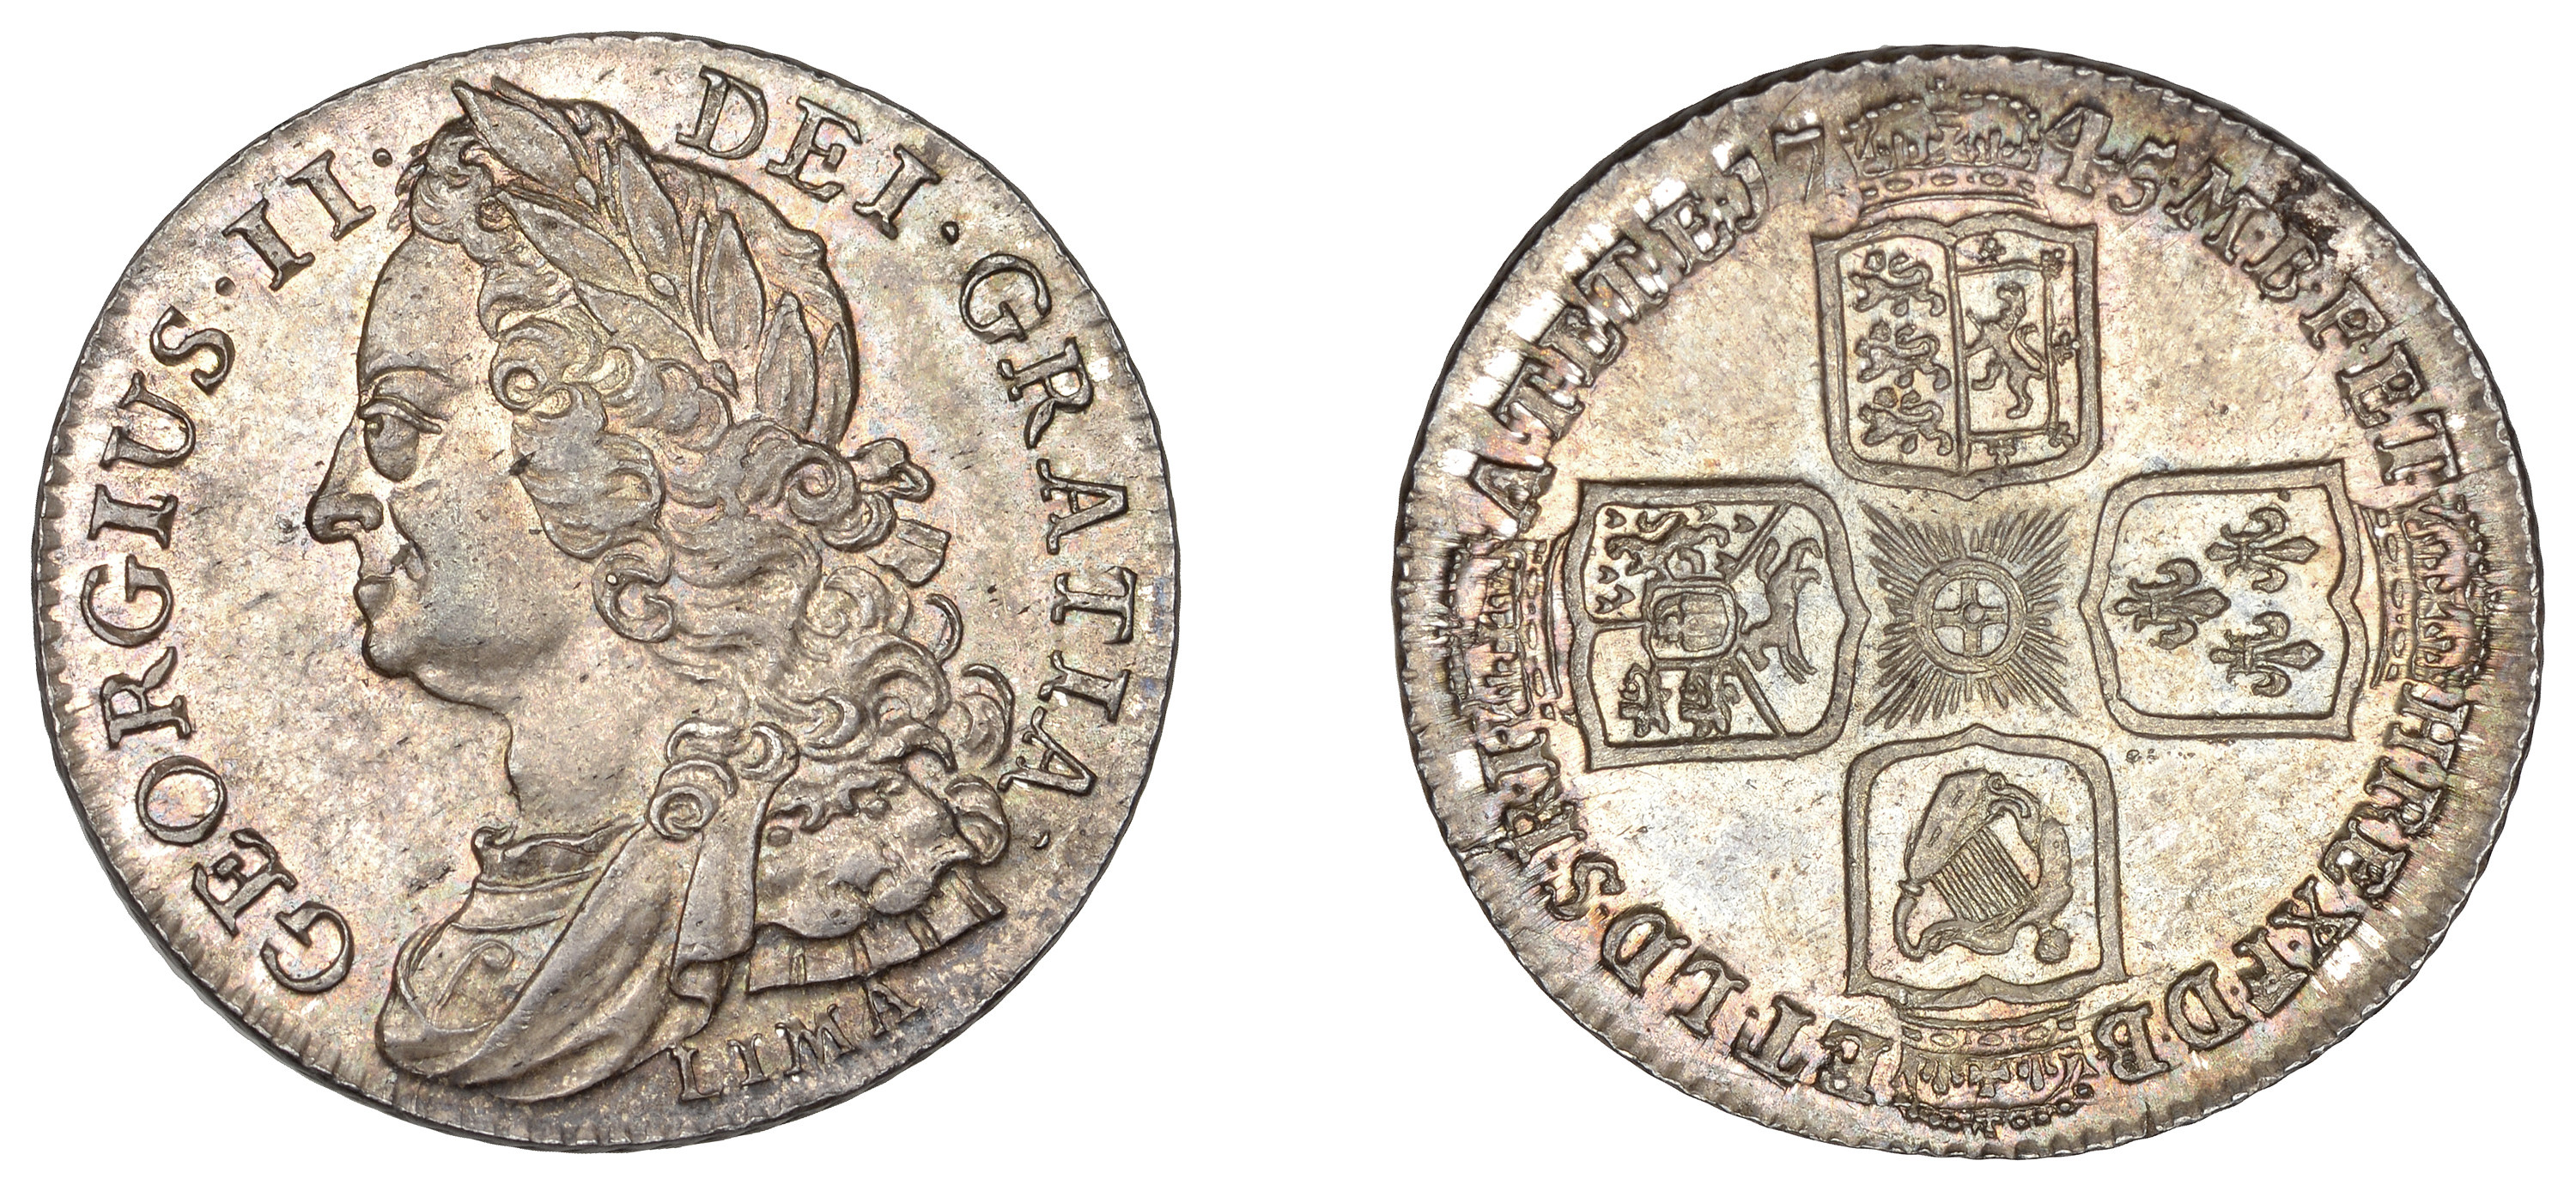 George II (1727-1760), Shilling, 1745 lima (ESC 1724; S 3703). Good extremely fine, attracti...